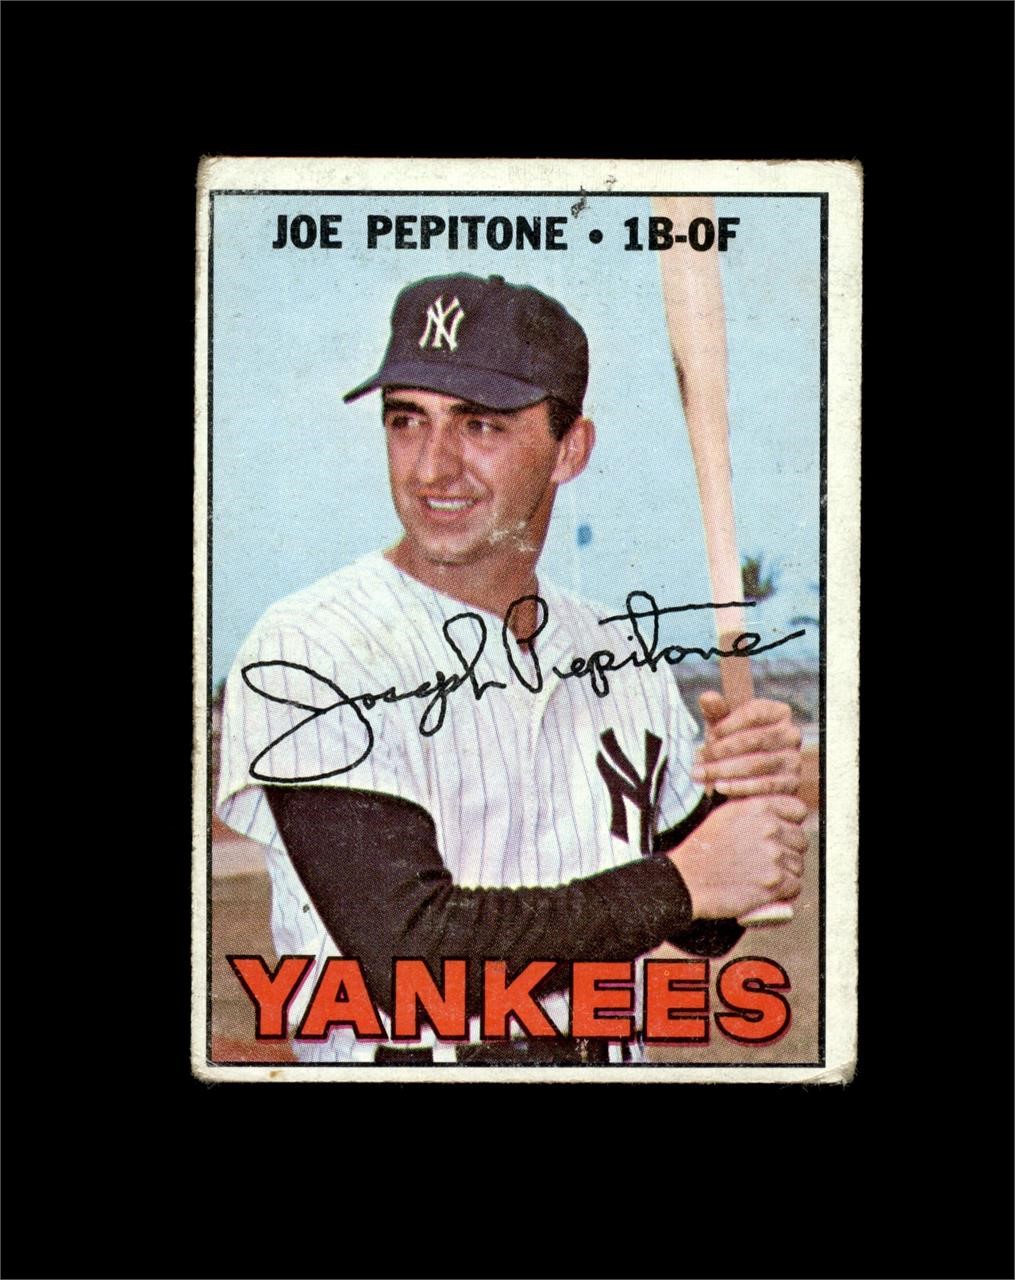 Vintage & Modern Sports Cards - Ends WED 6/26 9PM CST